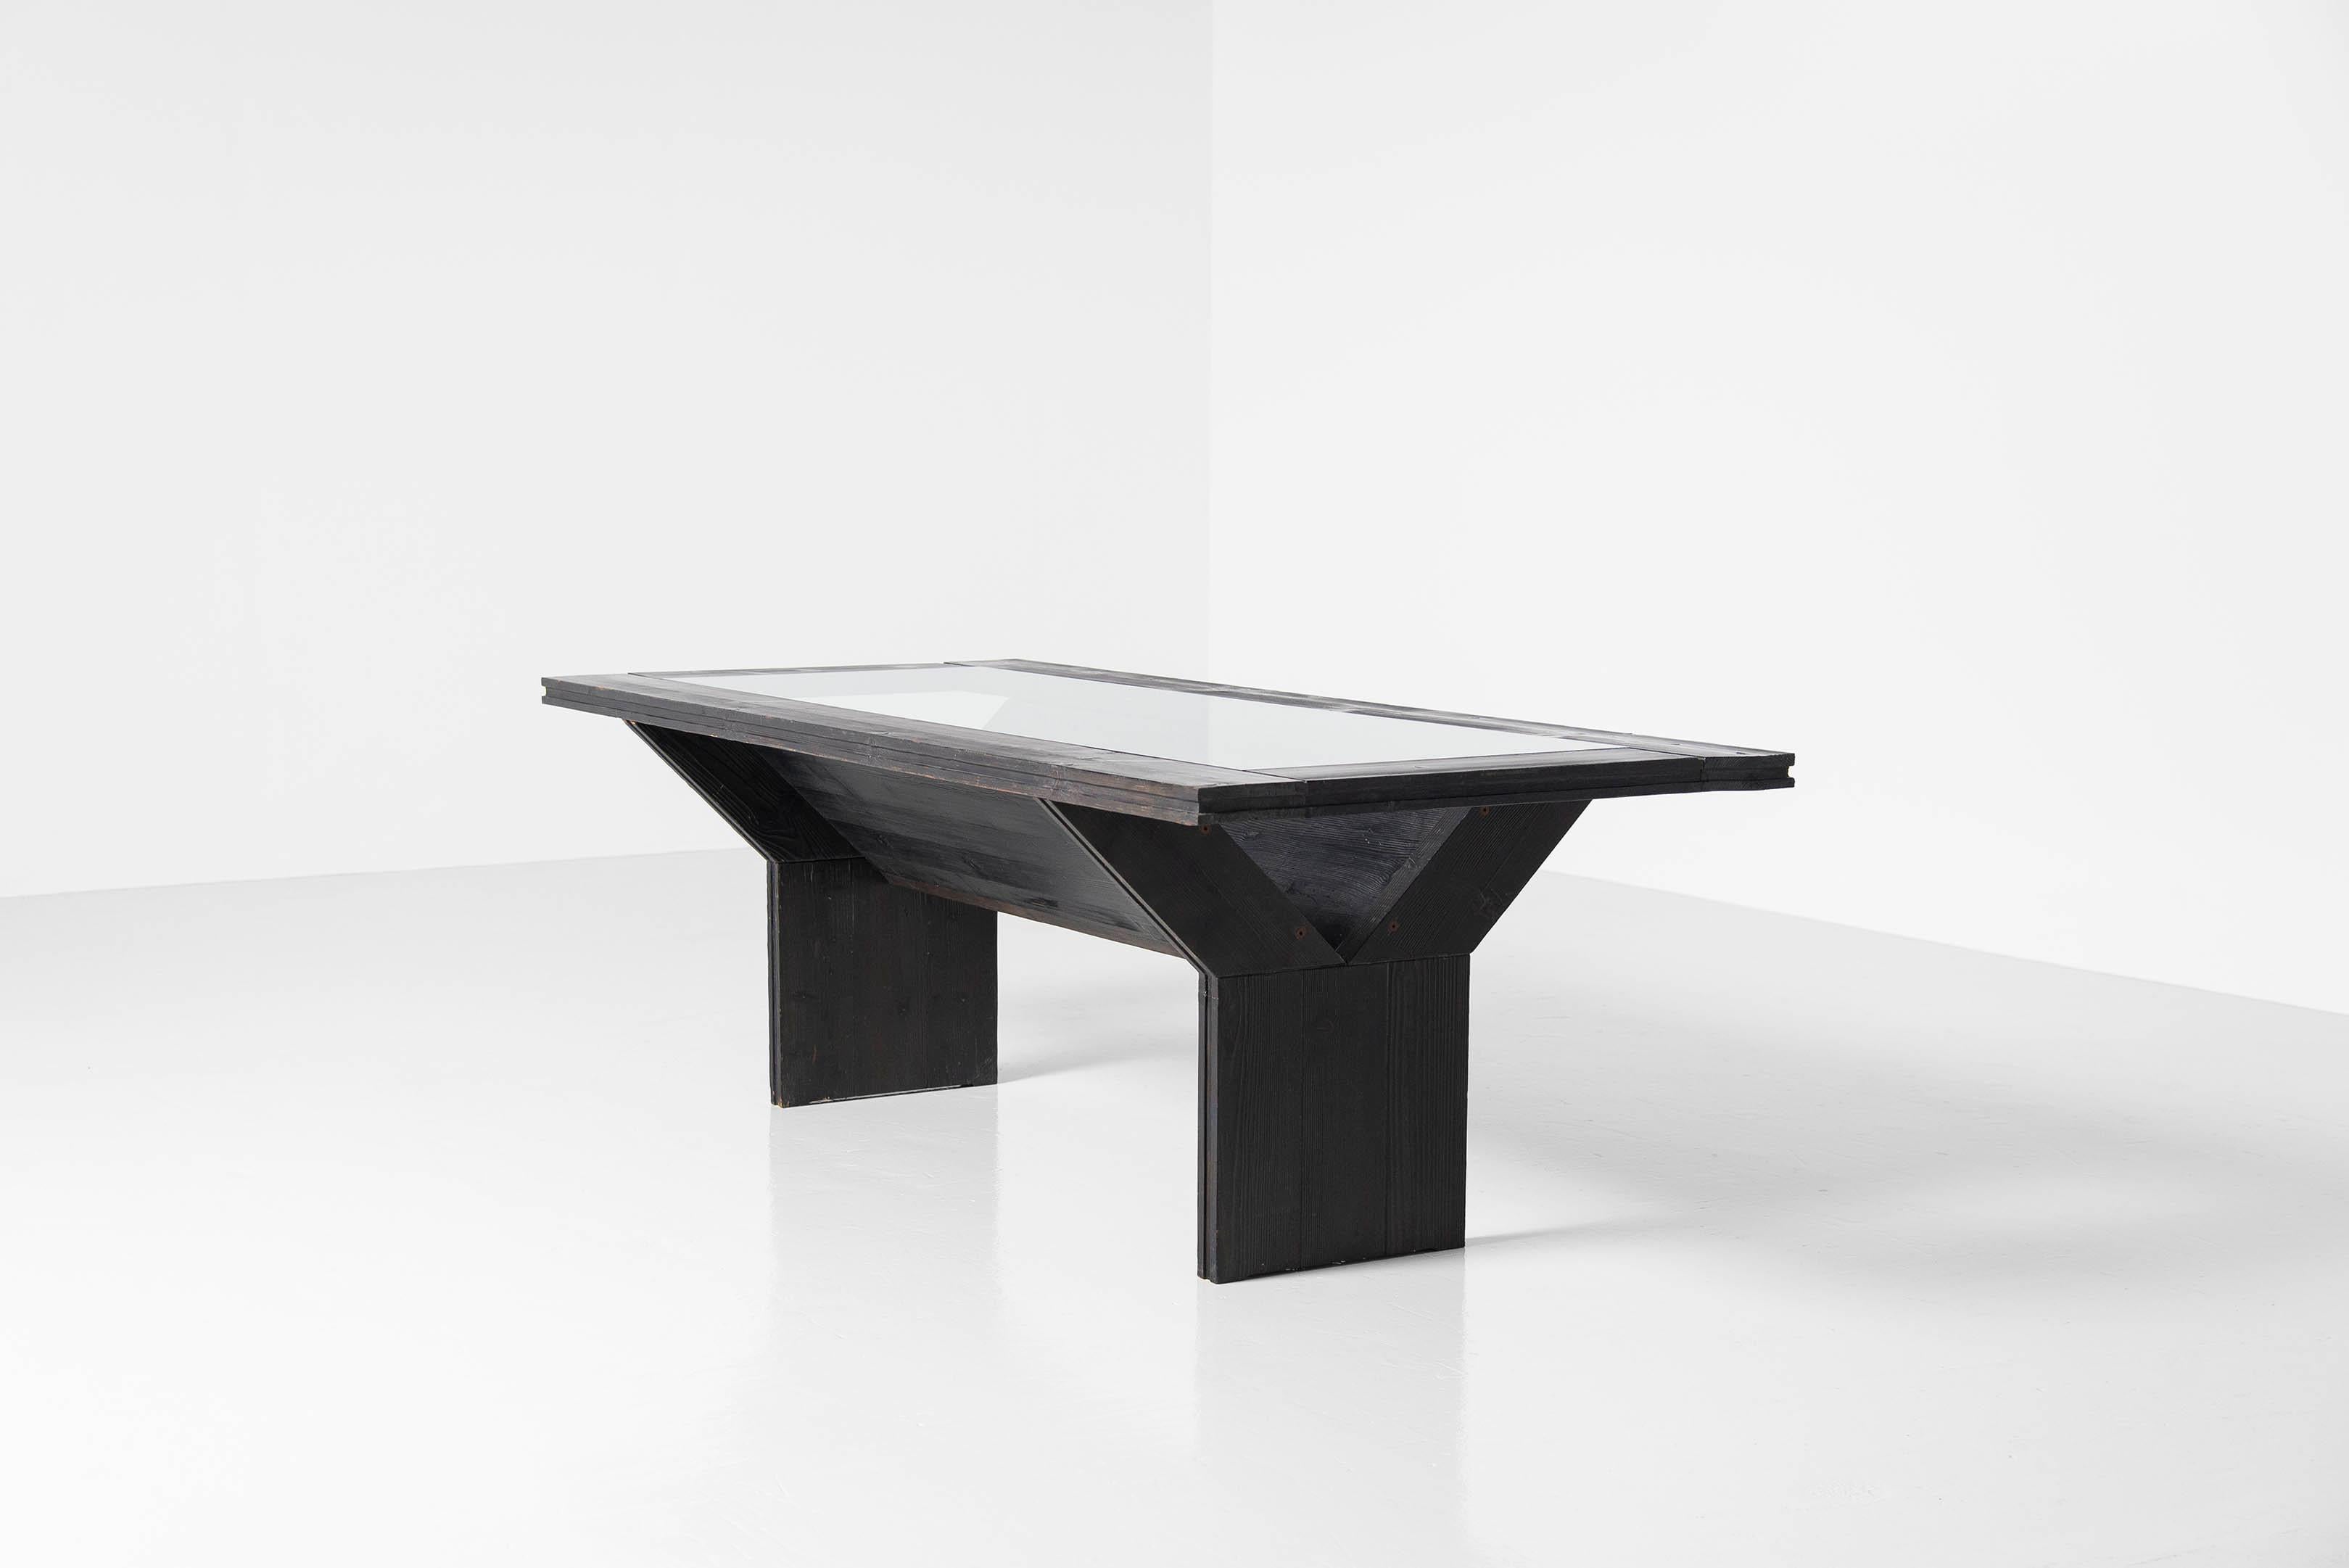 Architectural dining table model T30 designed by Edoardo Landi and manufactured by Studio D, Italy 1973. This table is designed by Architect Landi in 1973, and was produced in a very small series by StudioD, together with some chairs, cabinets and